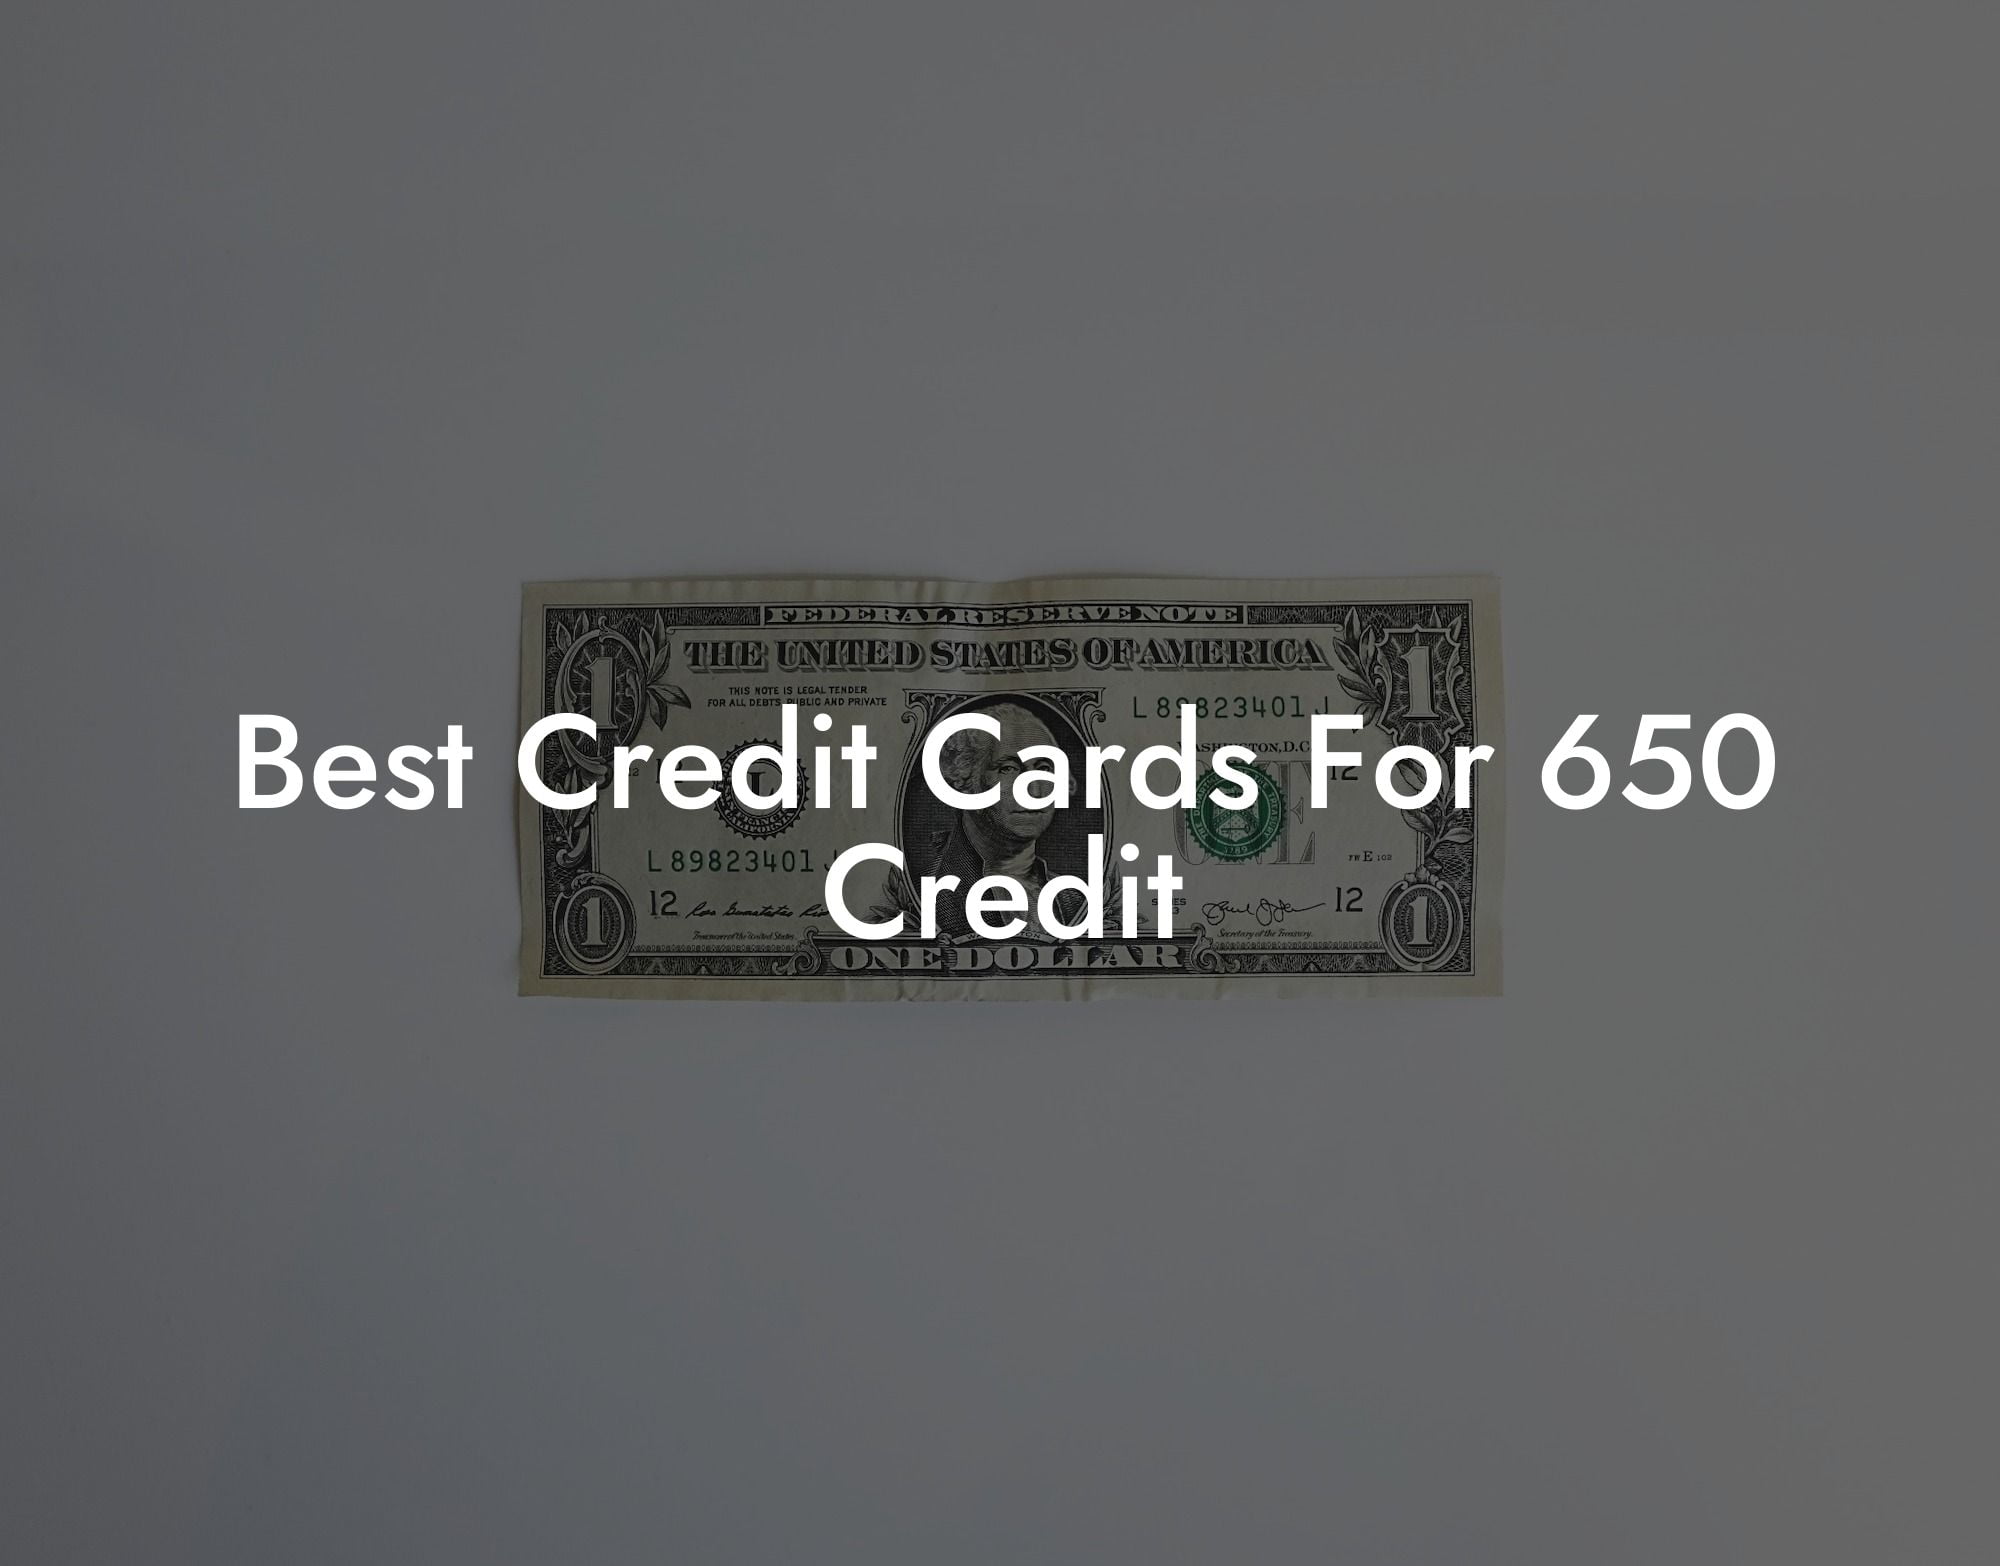 Best Credit Cards For 650 Credit